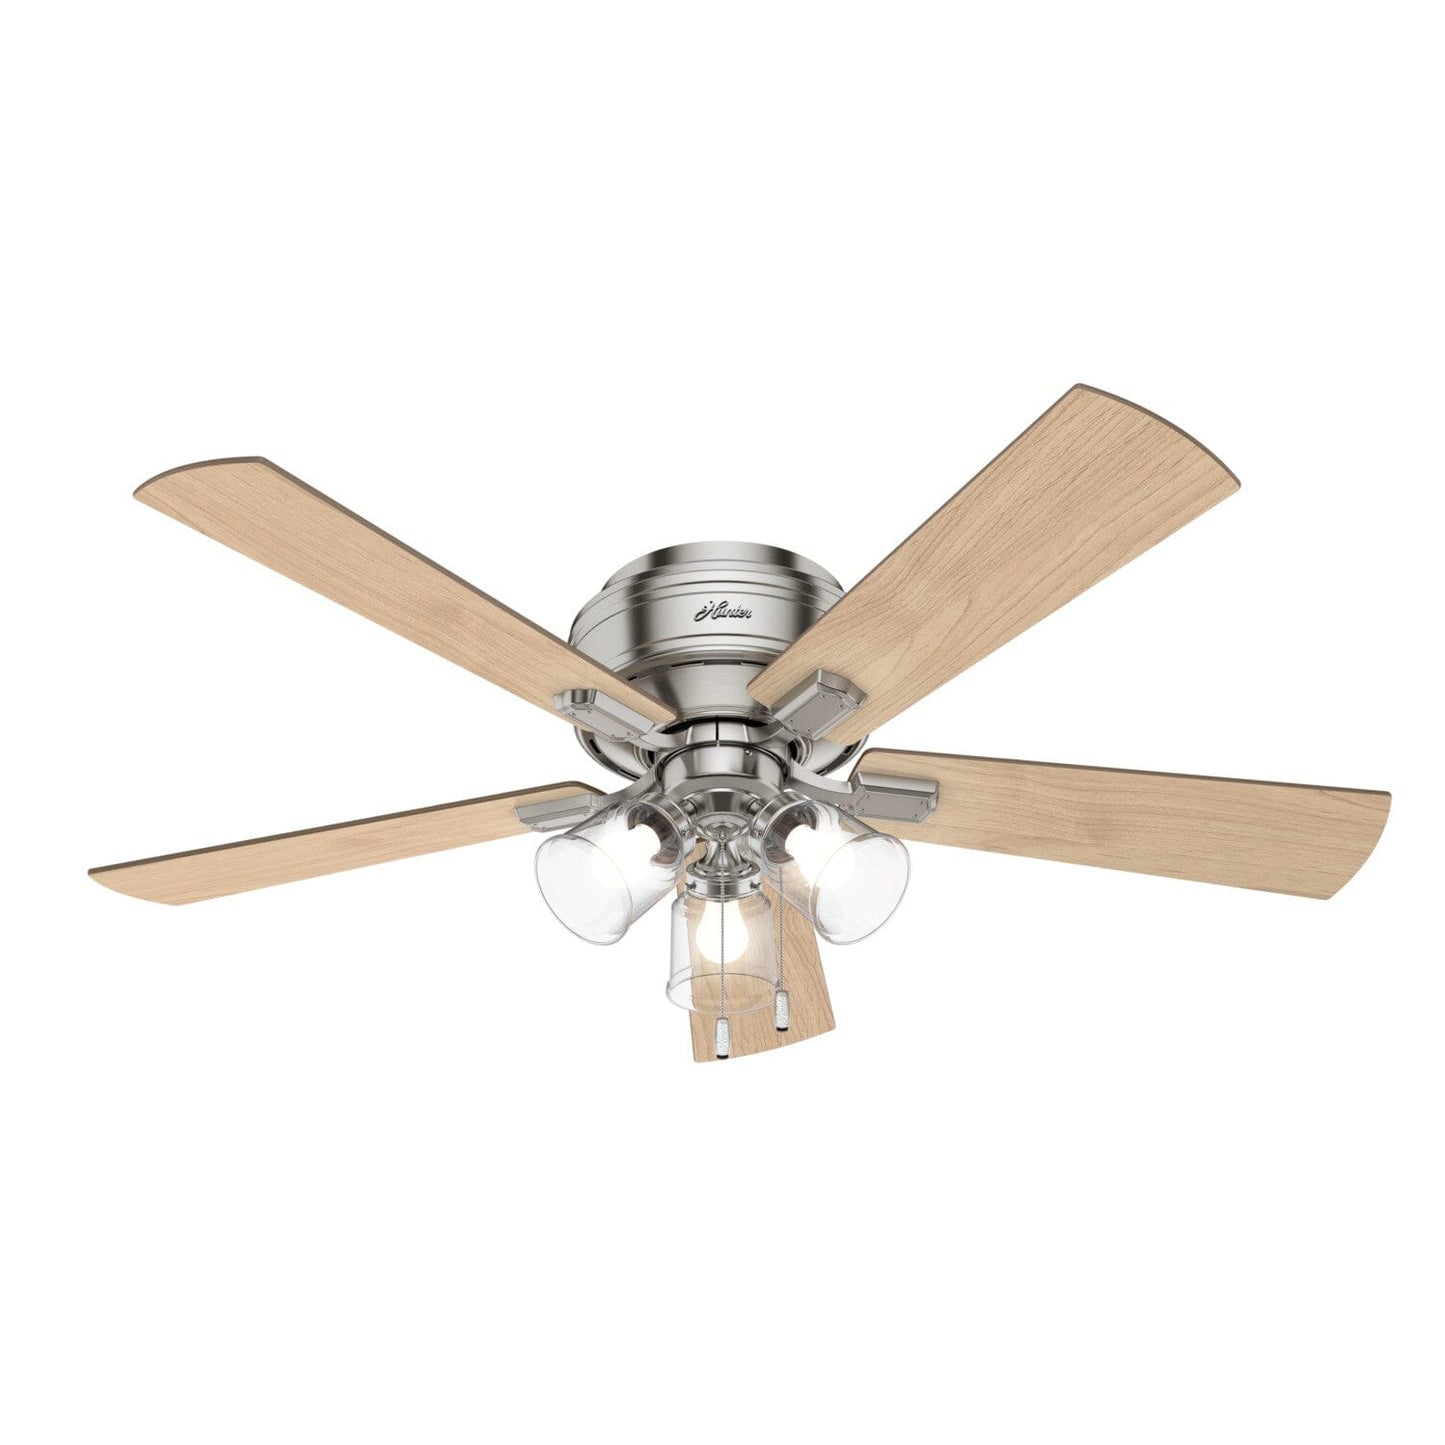 Crestfield Low Profile with 3 LED Lights 52 inch Ceiling Fans Hunter Brushed Nickel - Bleached Grey Pine 